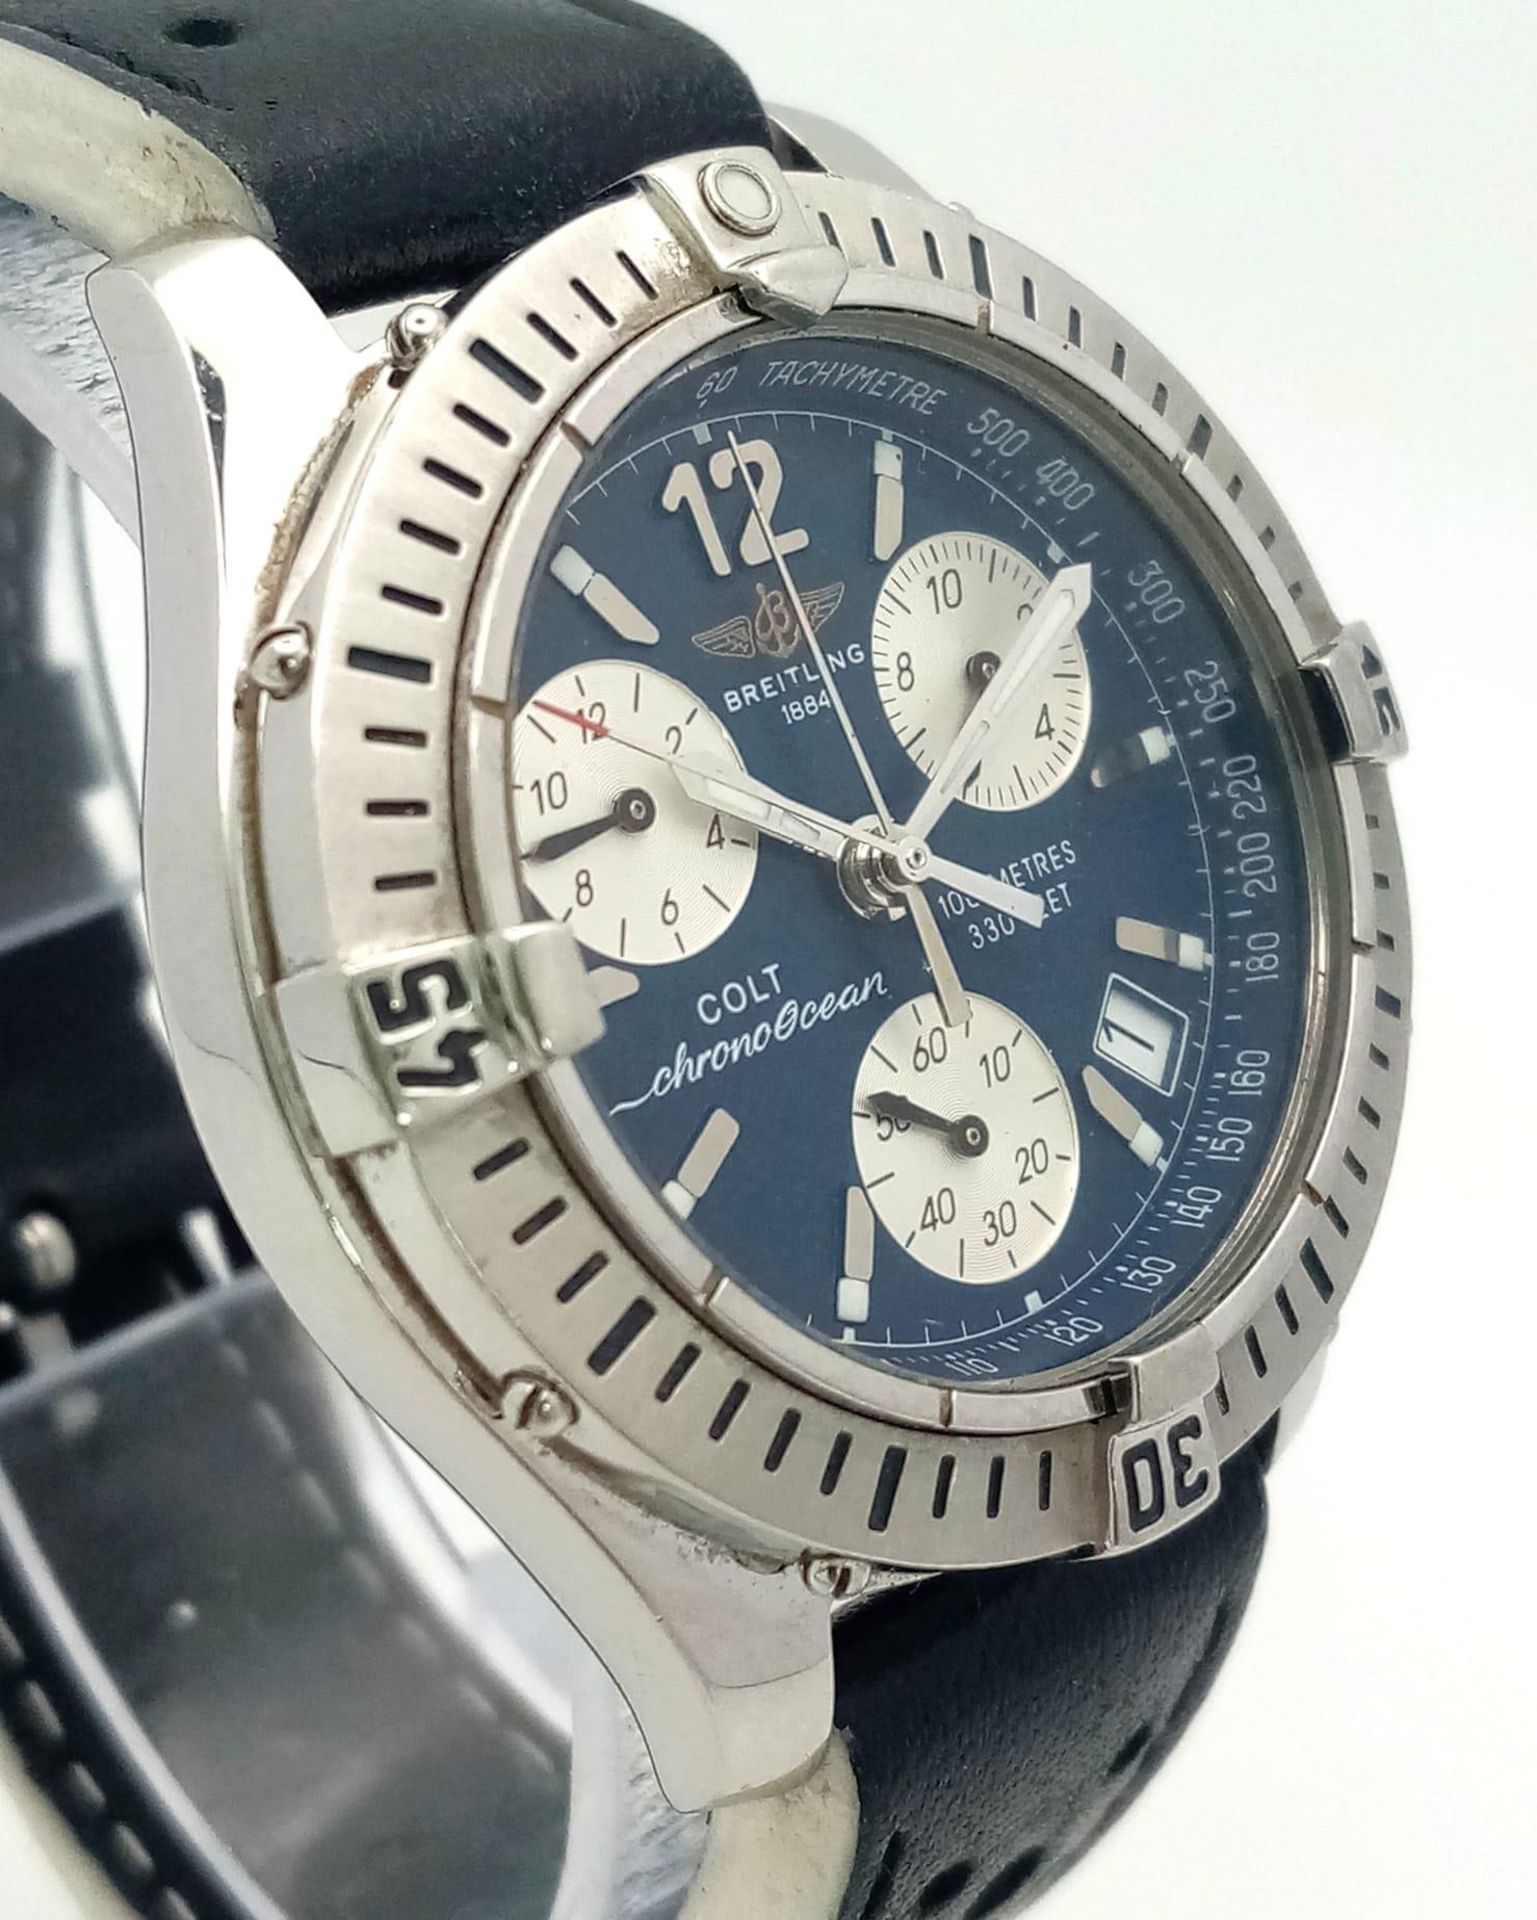 A Breitling Colt Chrono Ocean Gents Watch. Black leather strap. Stainless steel case - 38mm. - Image 4 of 6